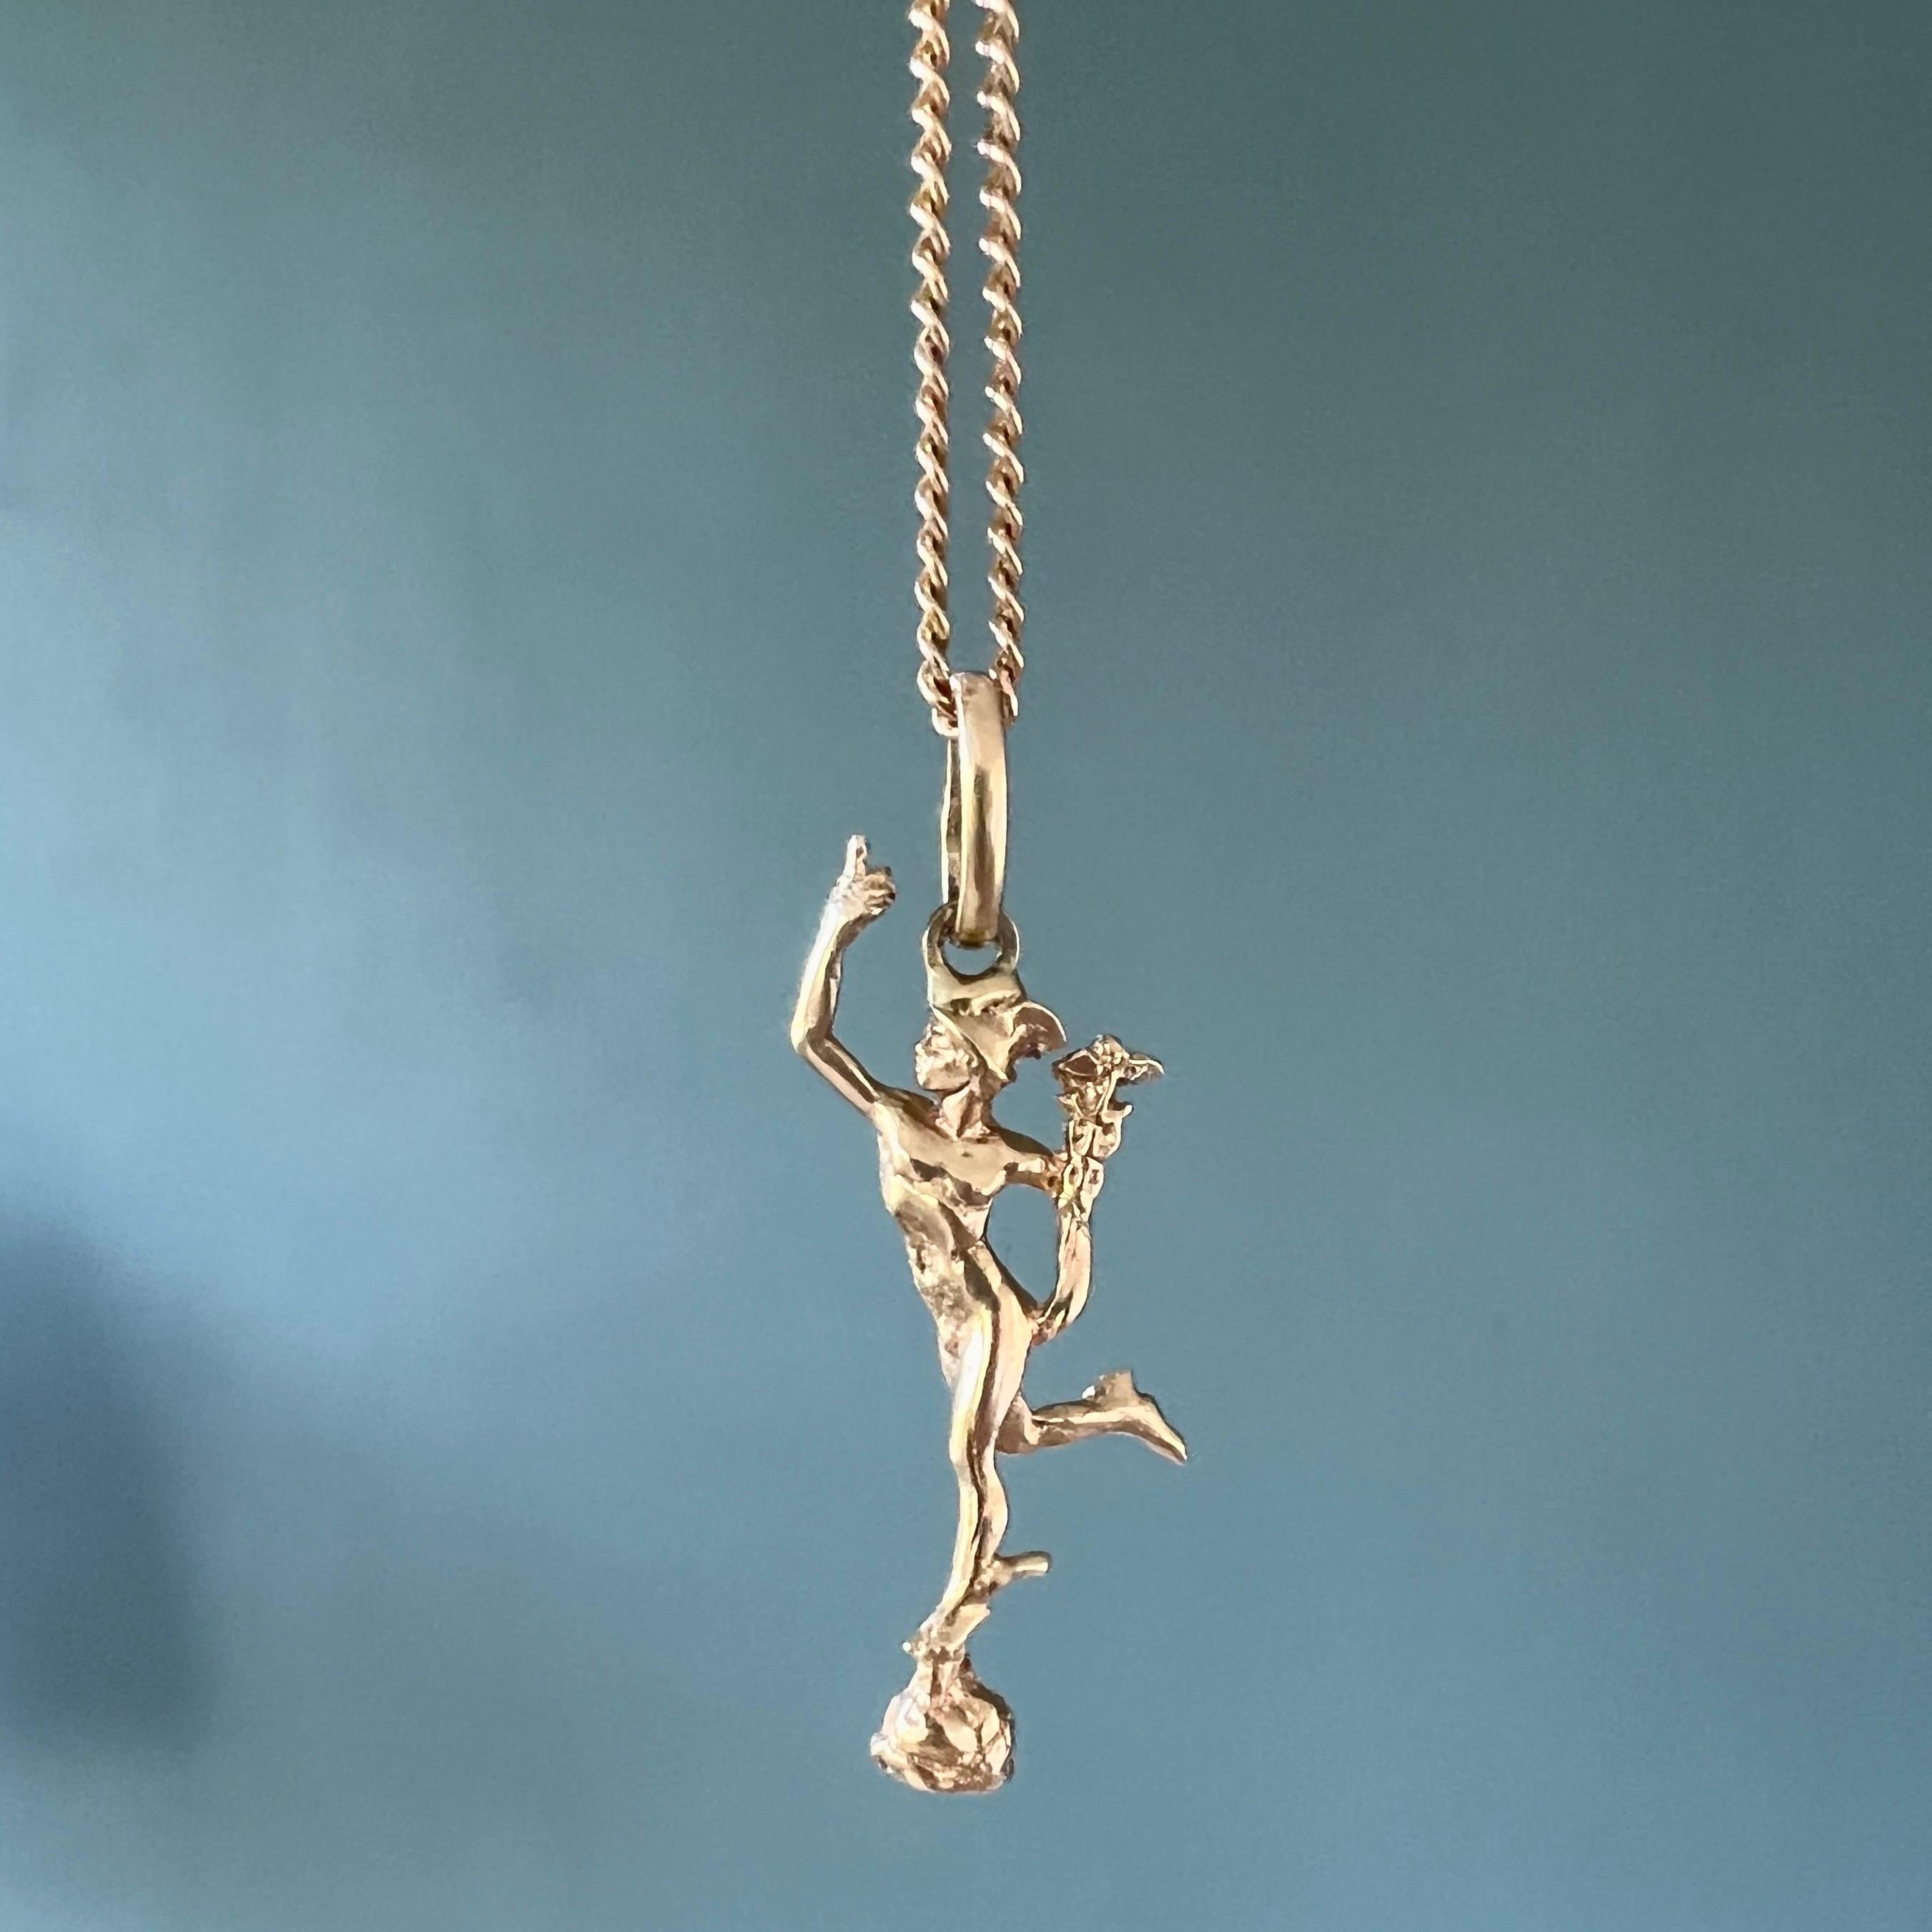 An 18 karat yellow gold Mercury (Hermès to the Greeks) charm pendant. This charm is a design based on the original statue by Italian designer Giovanni da Bologna (1529-1608). The flying Mercury is the Roman messenger of the ancient gods and patron